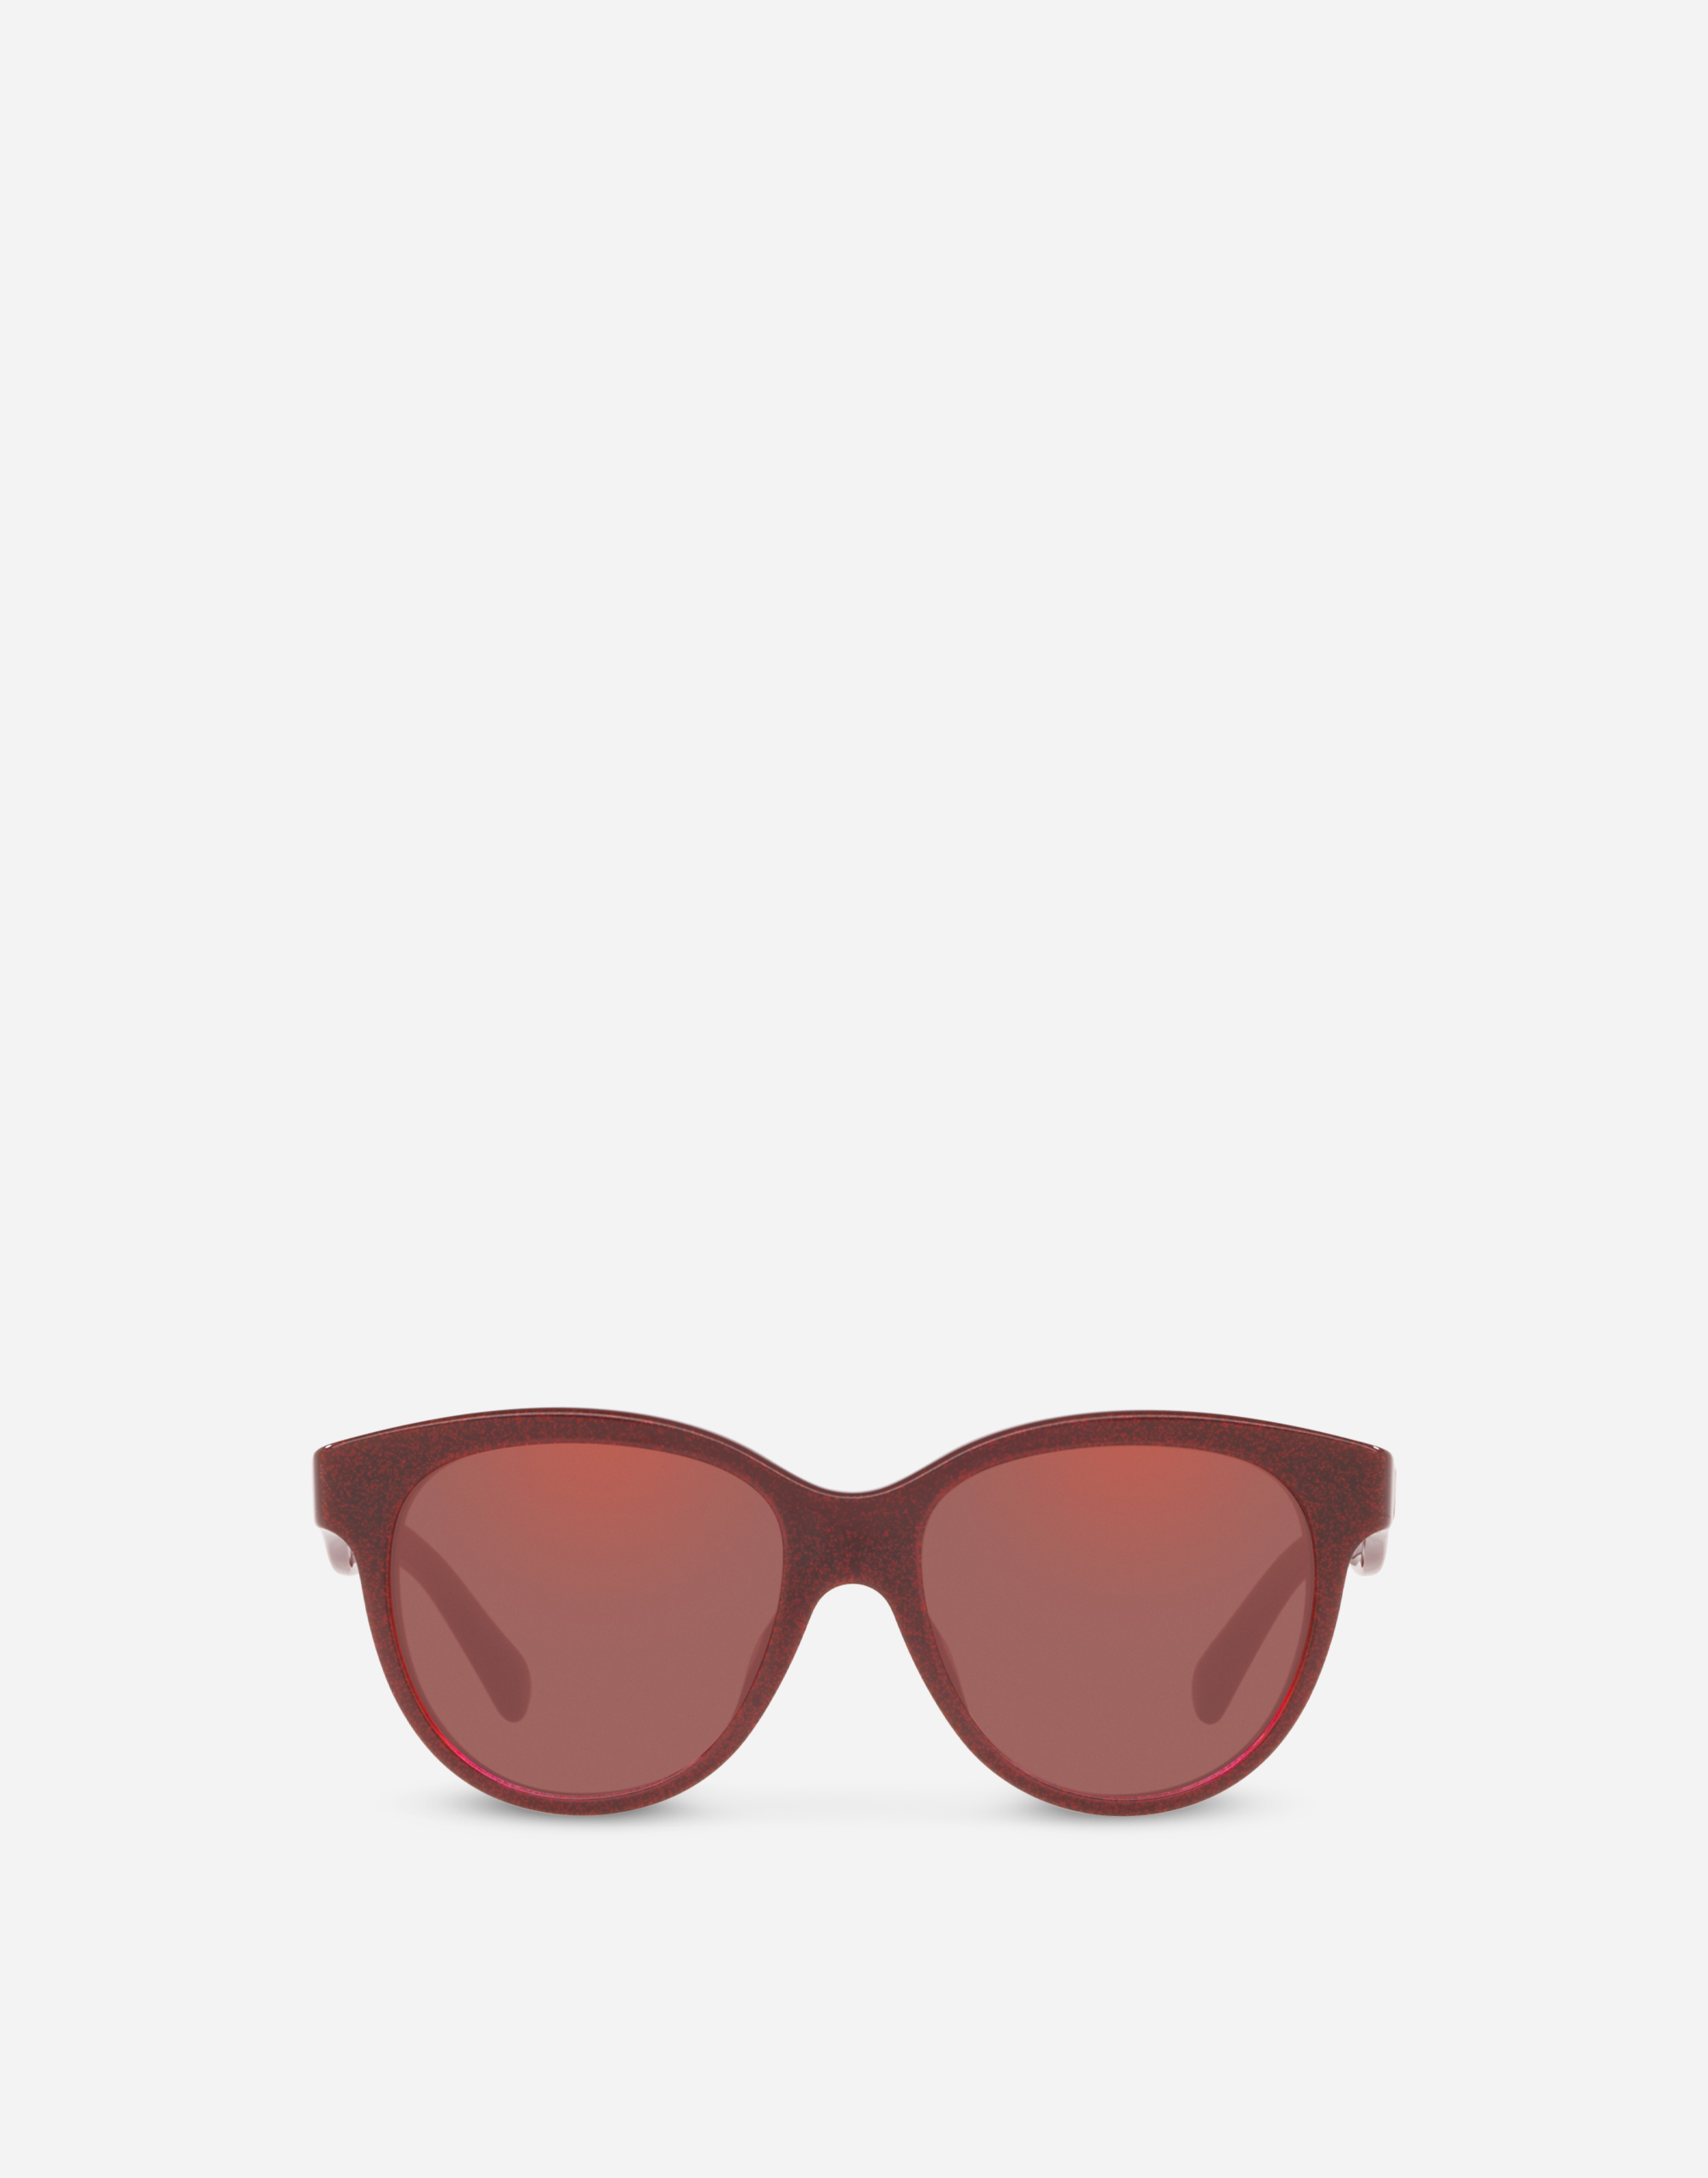 Print family sunglasses in Bordeaux and Gold